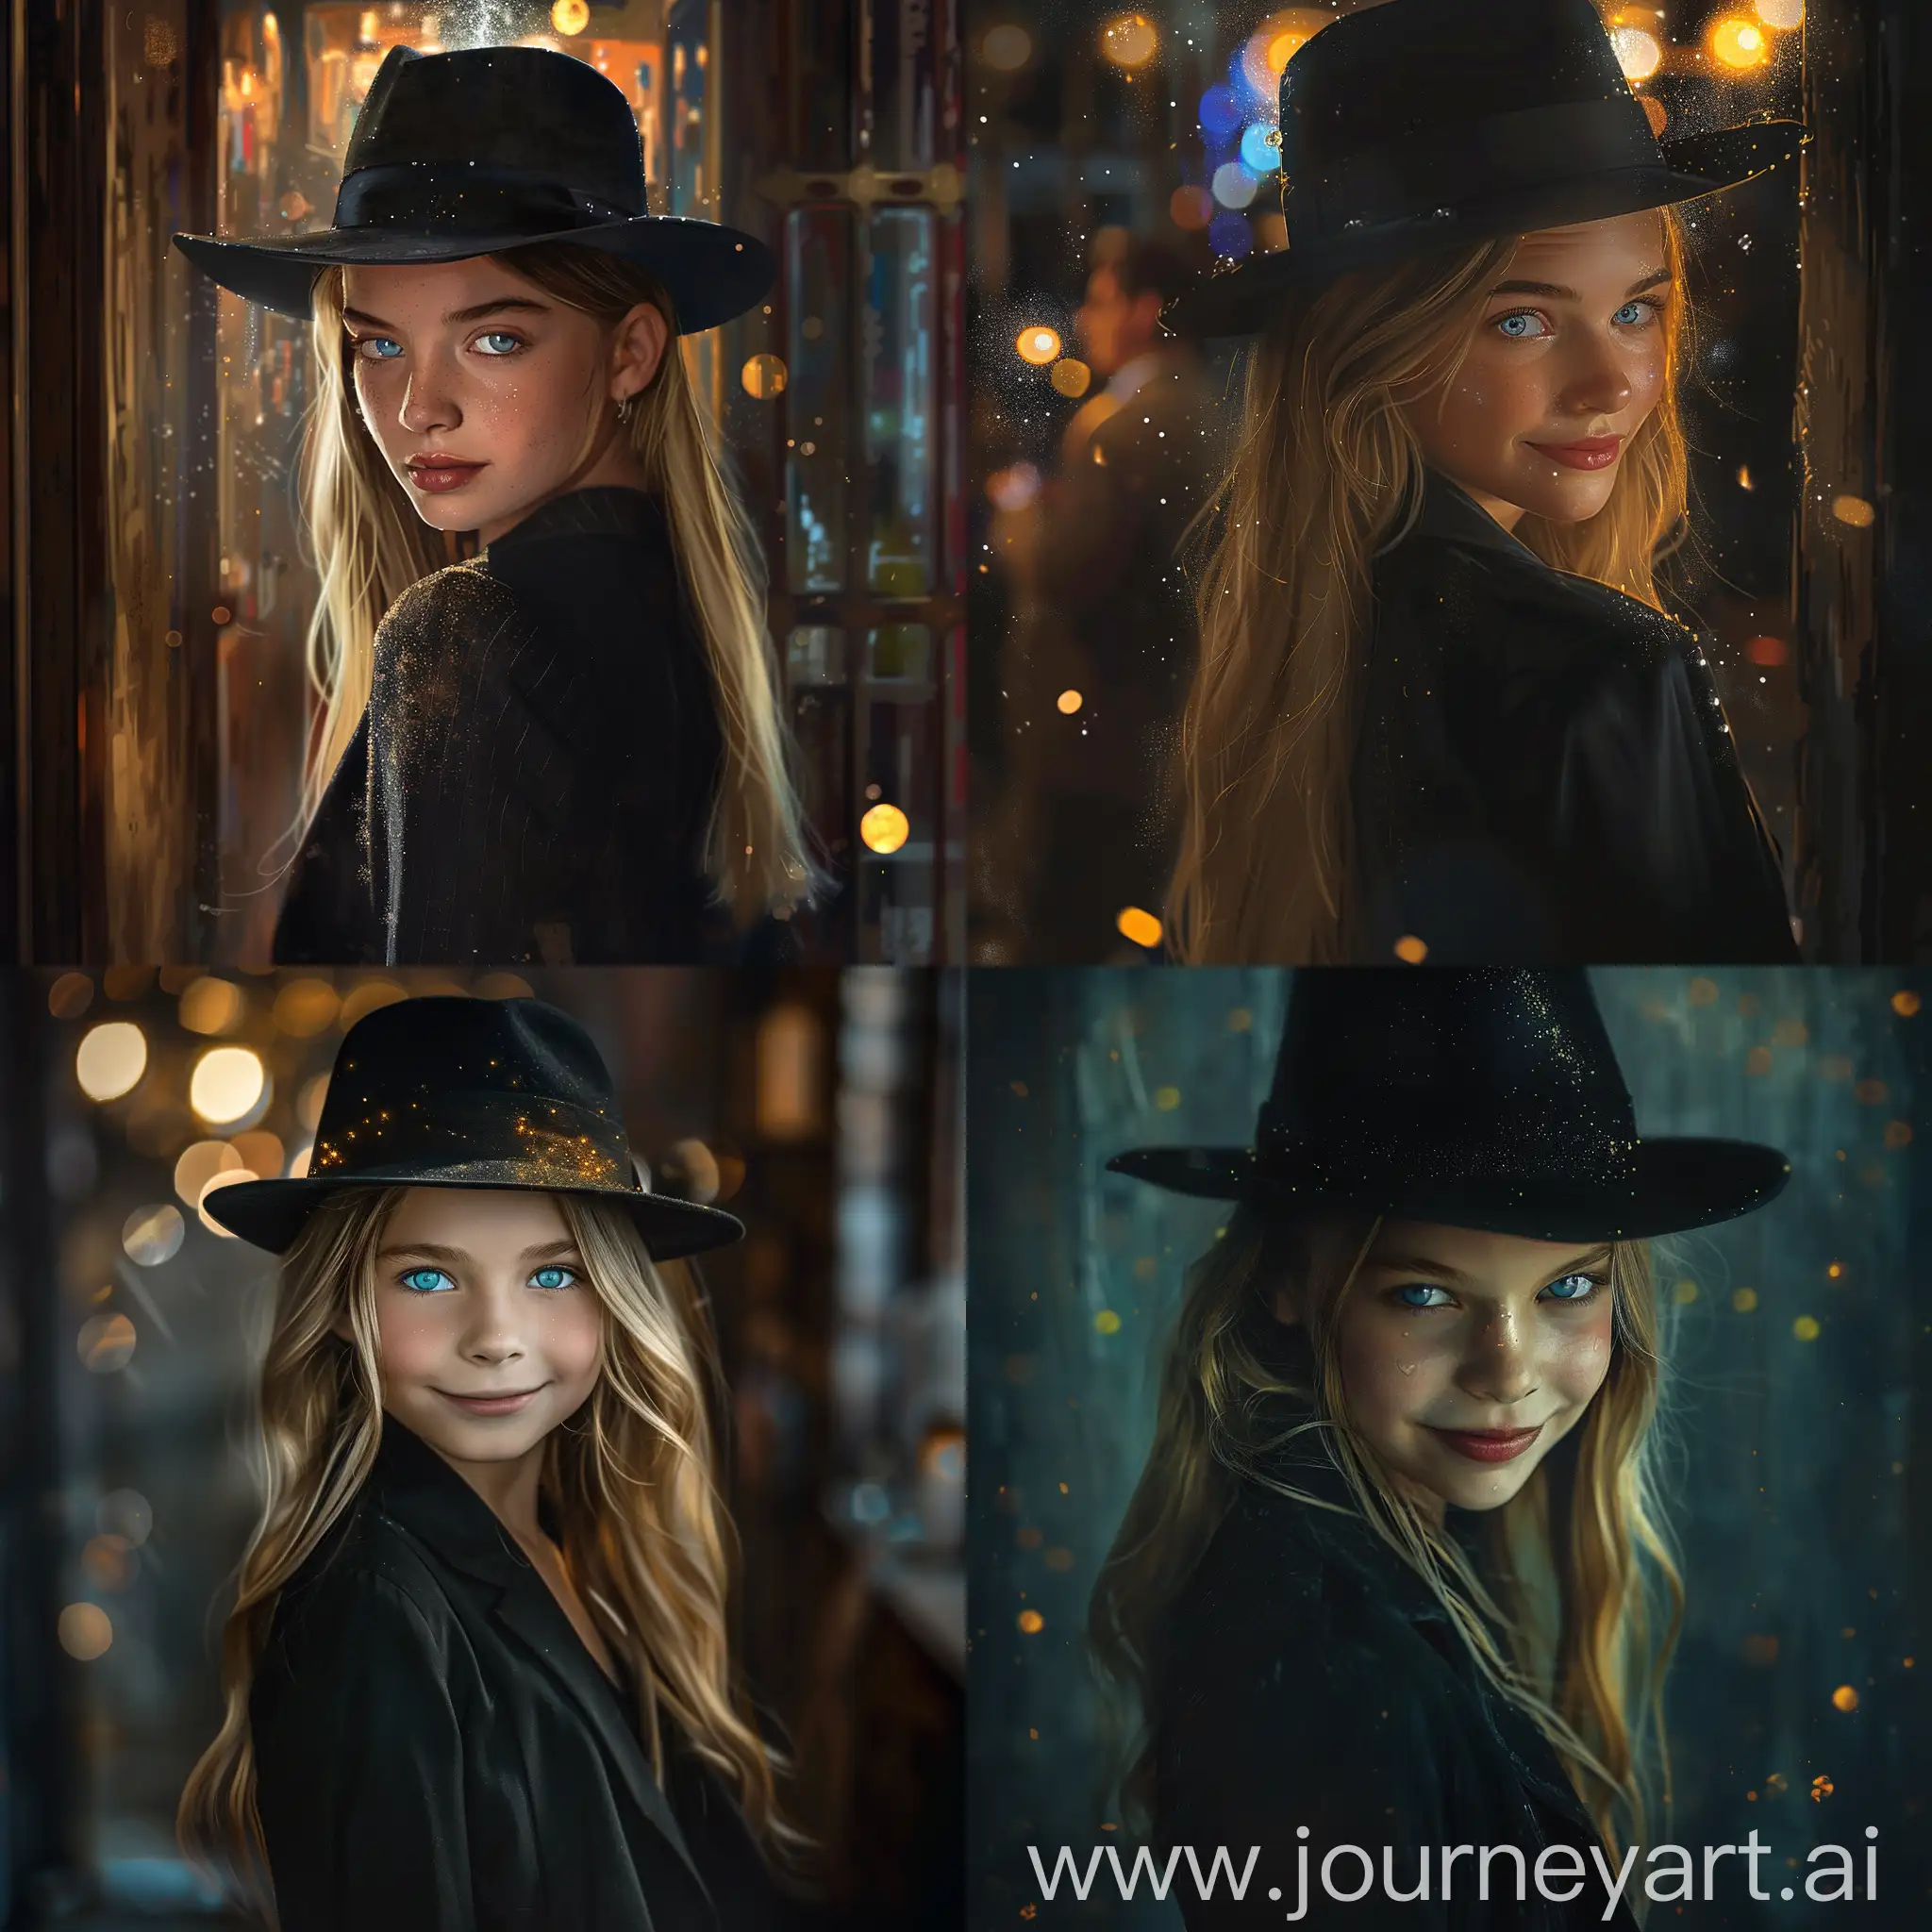 A fiercely proud Nordic girl stands, her presence radiating unwavering strength. Her blonde locks cascade down her back, framing a face marked by determination and resilience. This stunning portrait captures his piercing blue eyes, reflecting the lights of a bar. The intricate details of his black tango suit and vintage short-brimmed fedora hat speak of his warrior spirit. This high-quality painting perfectly combines power and grace, drawing the viewer into the captivating story of a fierce princess from the neighborhoods of Buenos Aires. playful body manipulations, divine proportion, showerless smile, gaze into camera, holographic glow, whimsical lighting, enchanted atmosphere, soft textures, imaginative artwork, ethereal glow, silent luminescence, vibrant background, full body, (((rule of the thirds))), high quality, high detail, high resolution, (bokeh:2), backlight,